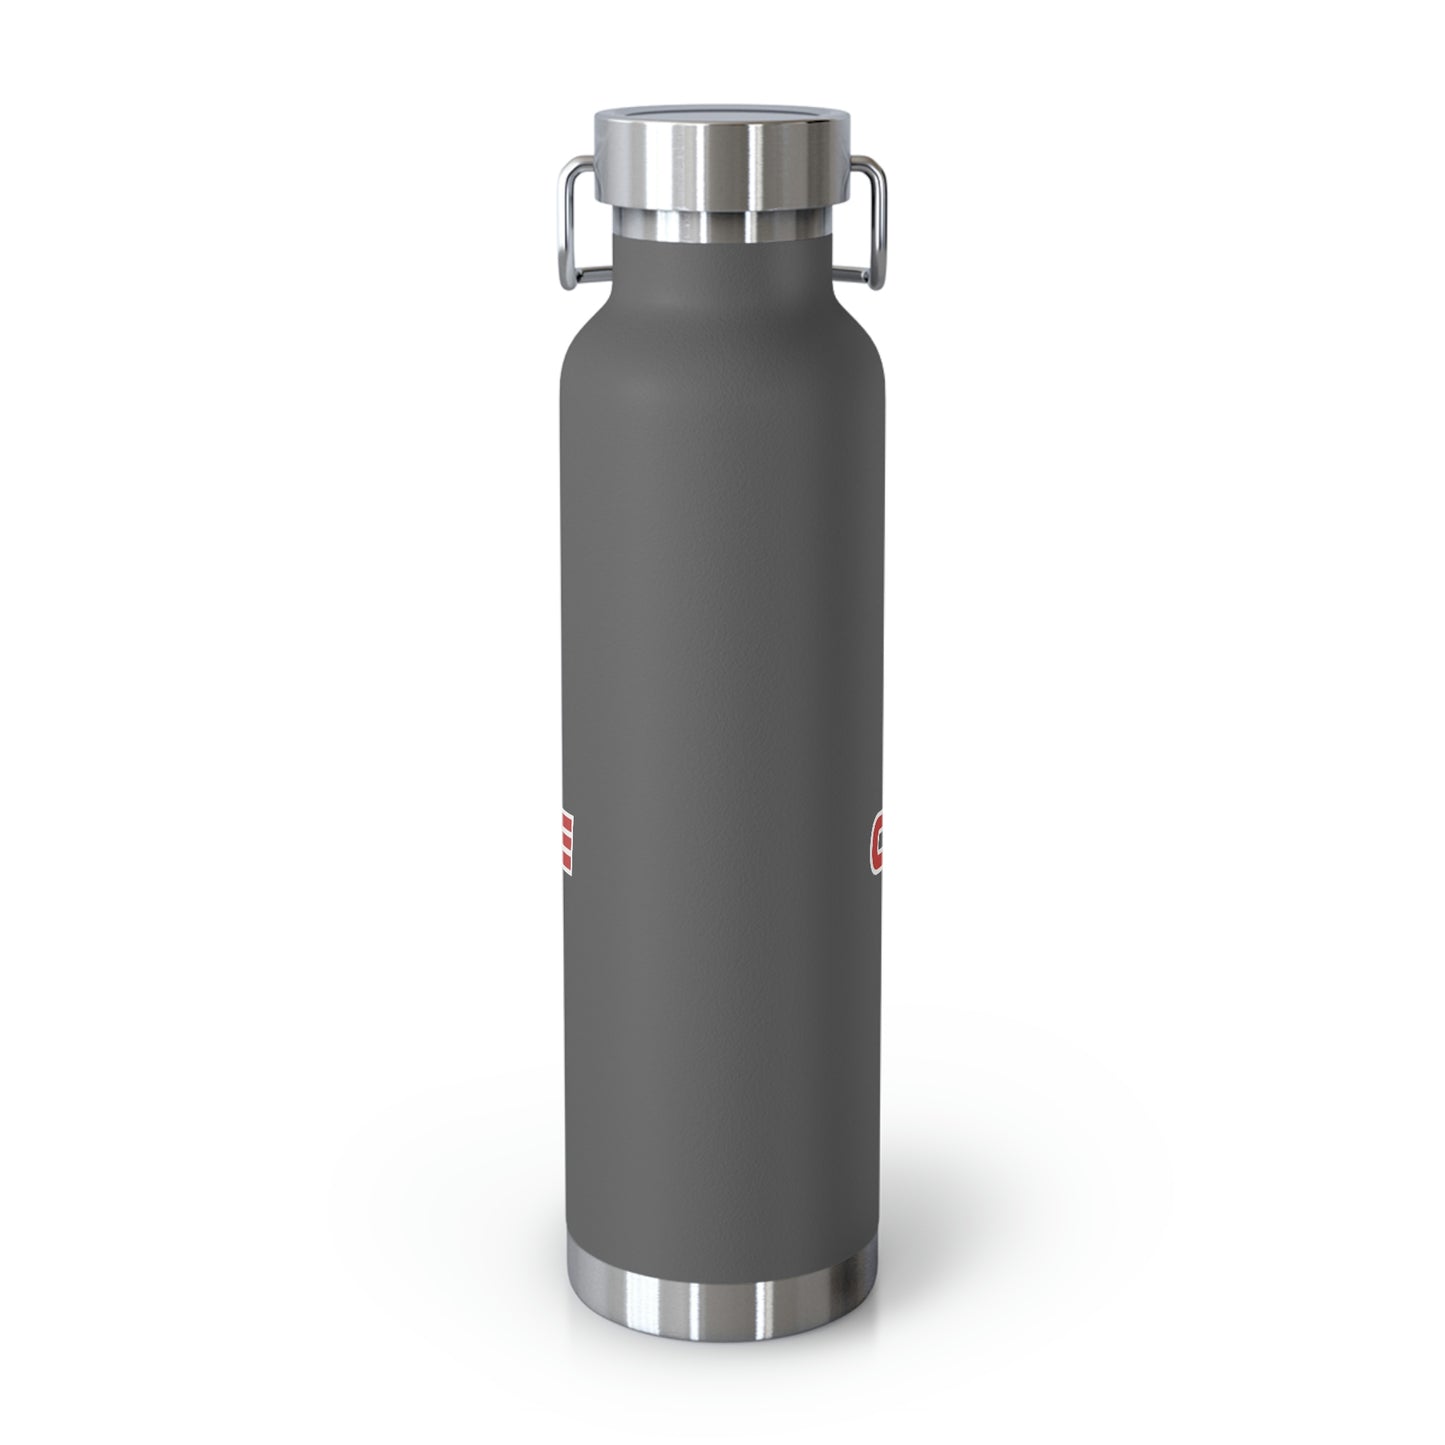 WRCCDC 2023 Competition Copper Vacuum Insulated Bottle, 22oz